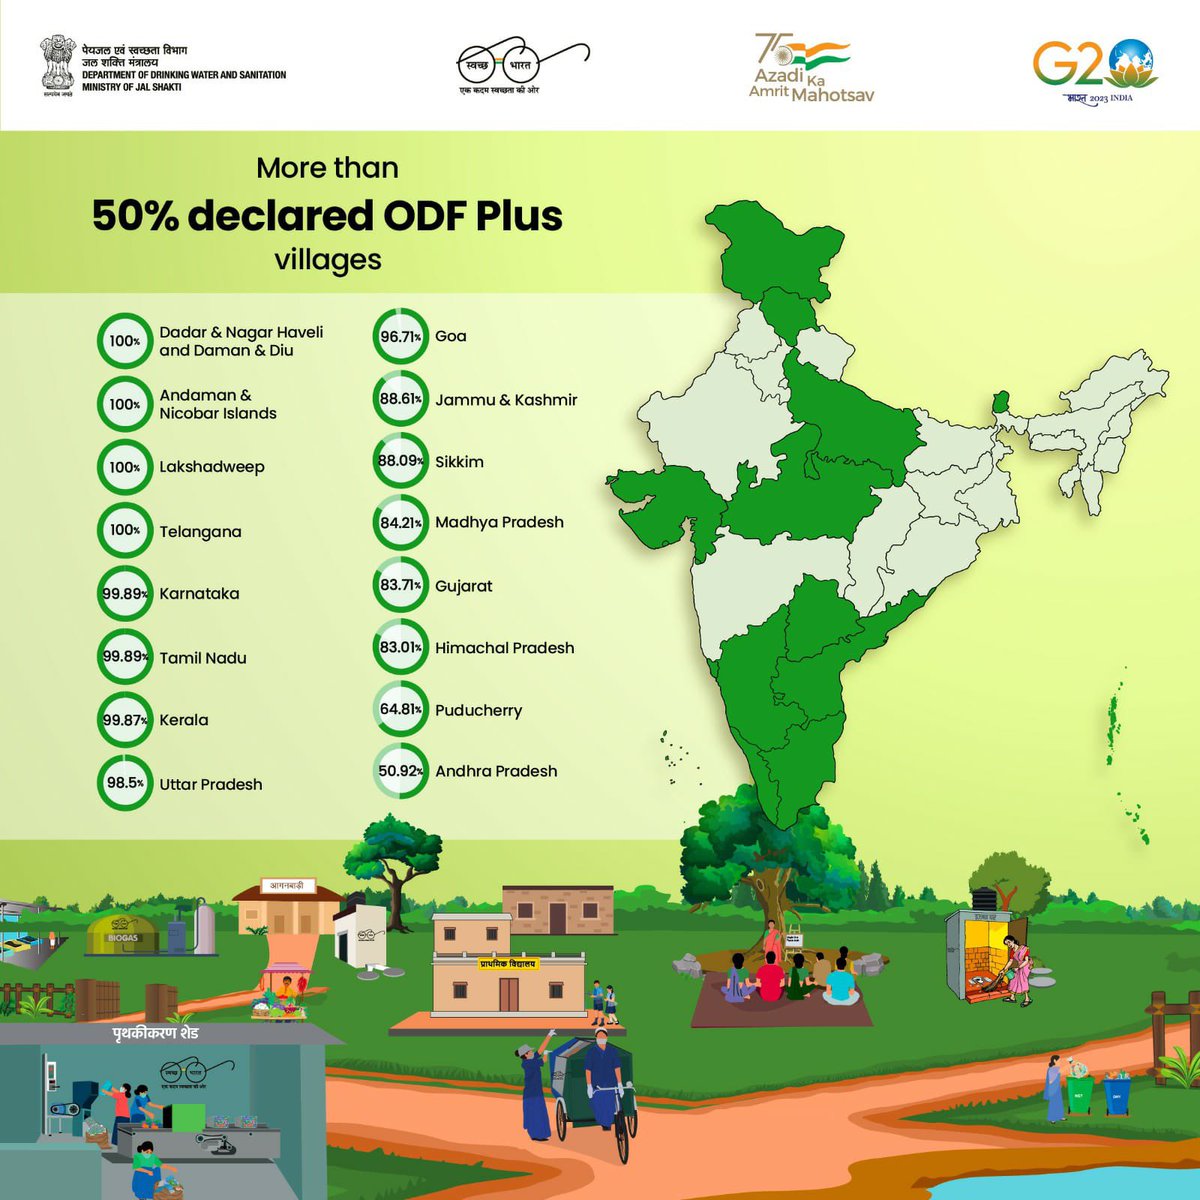 The incredible vision of PM Shri @narendramodi Ji is showing results now. 👏🏻

Congratulations 💐 to 16 States/UTs for having more than 50% ODF Plus Villages.
Keep moving towards achieving the goal of #SampoornaSwachhata 👍🏻

#SBMG #ODFPlus